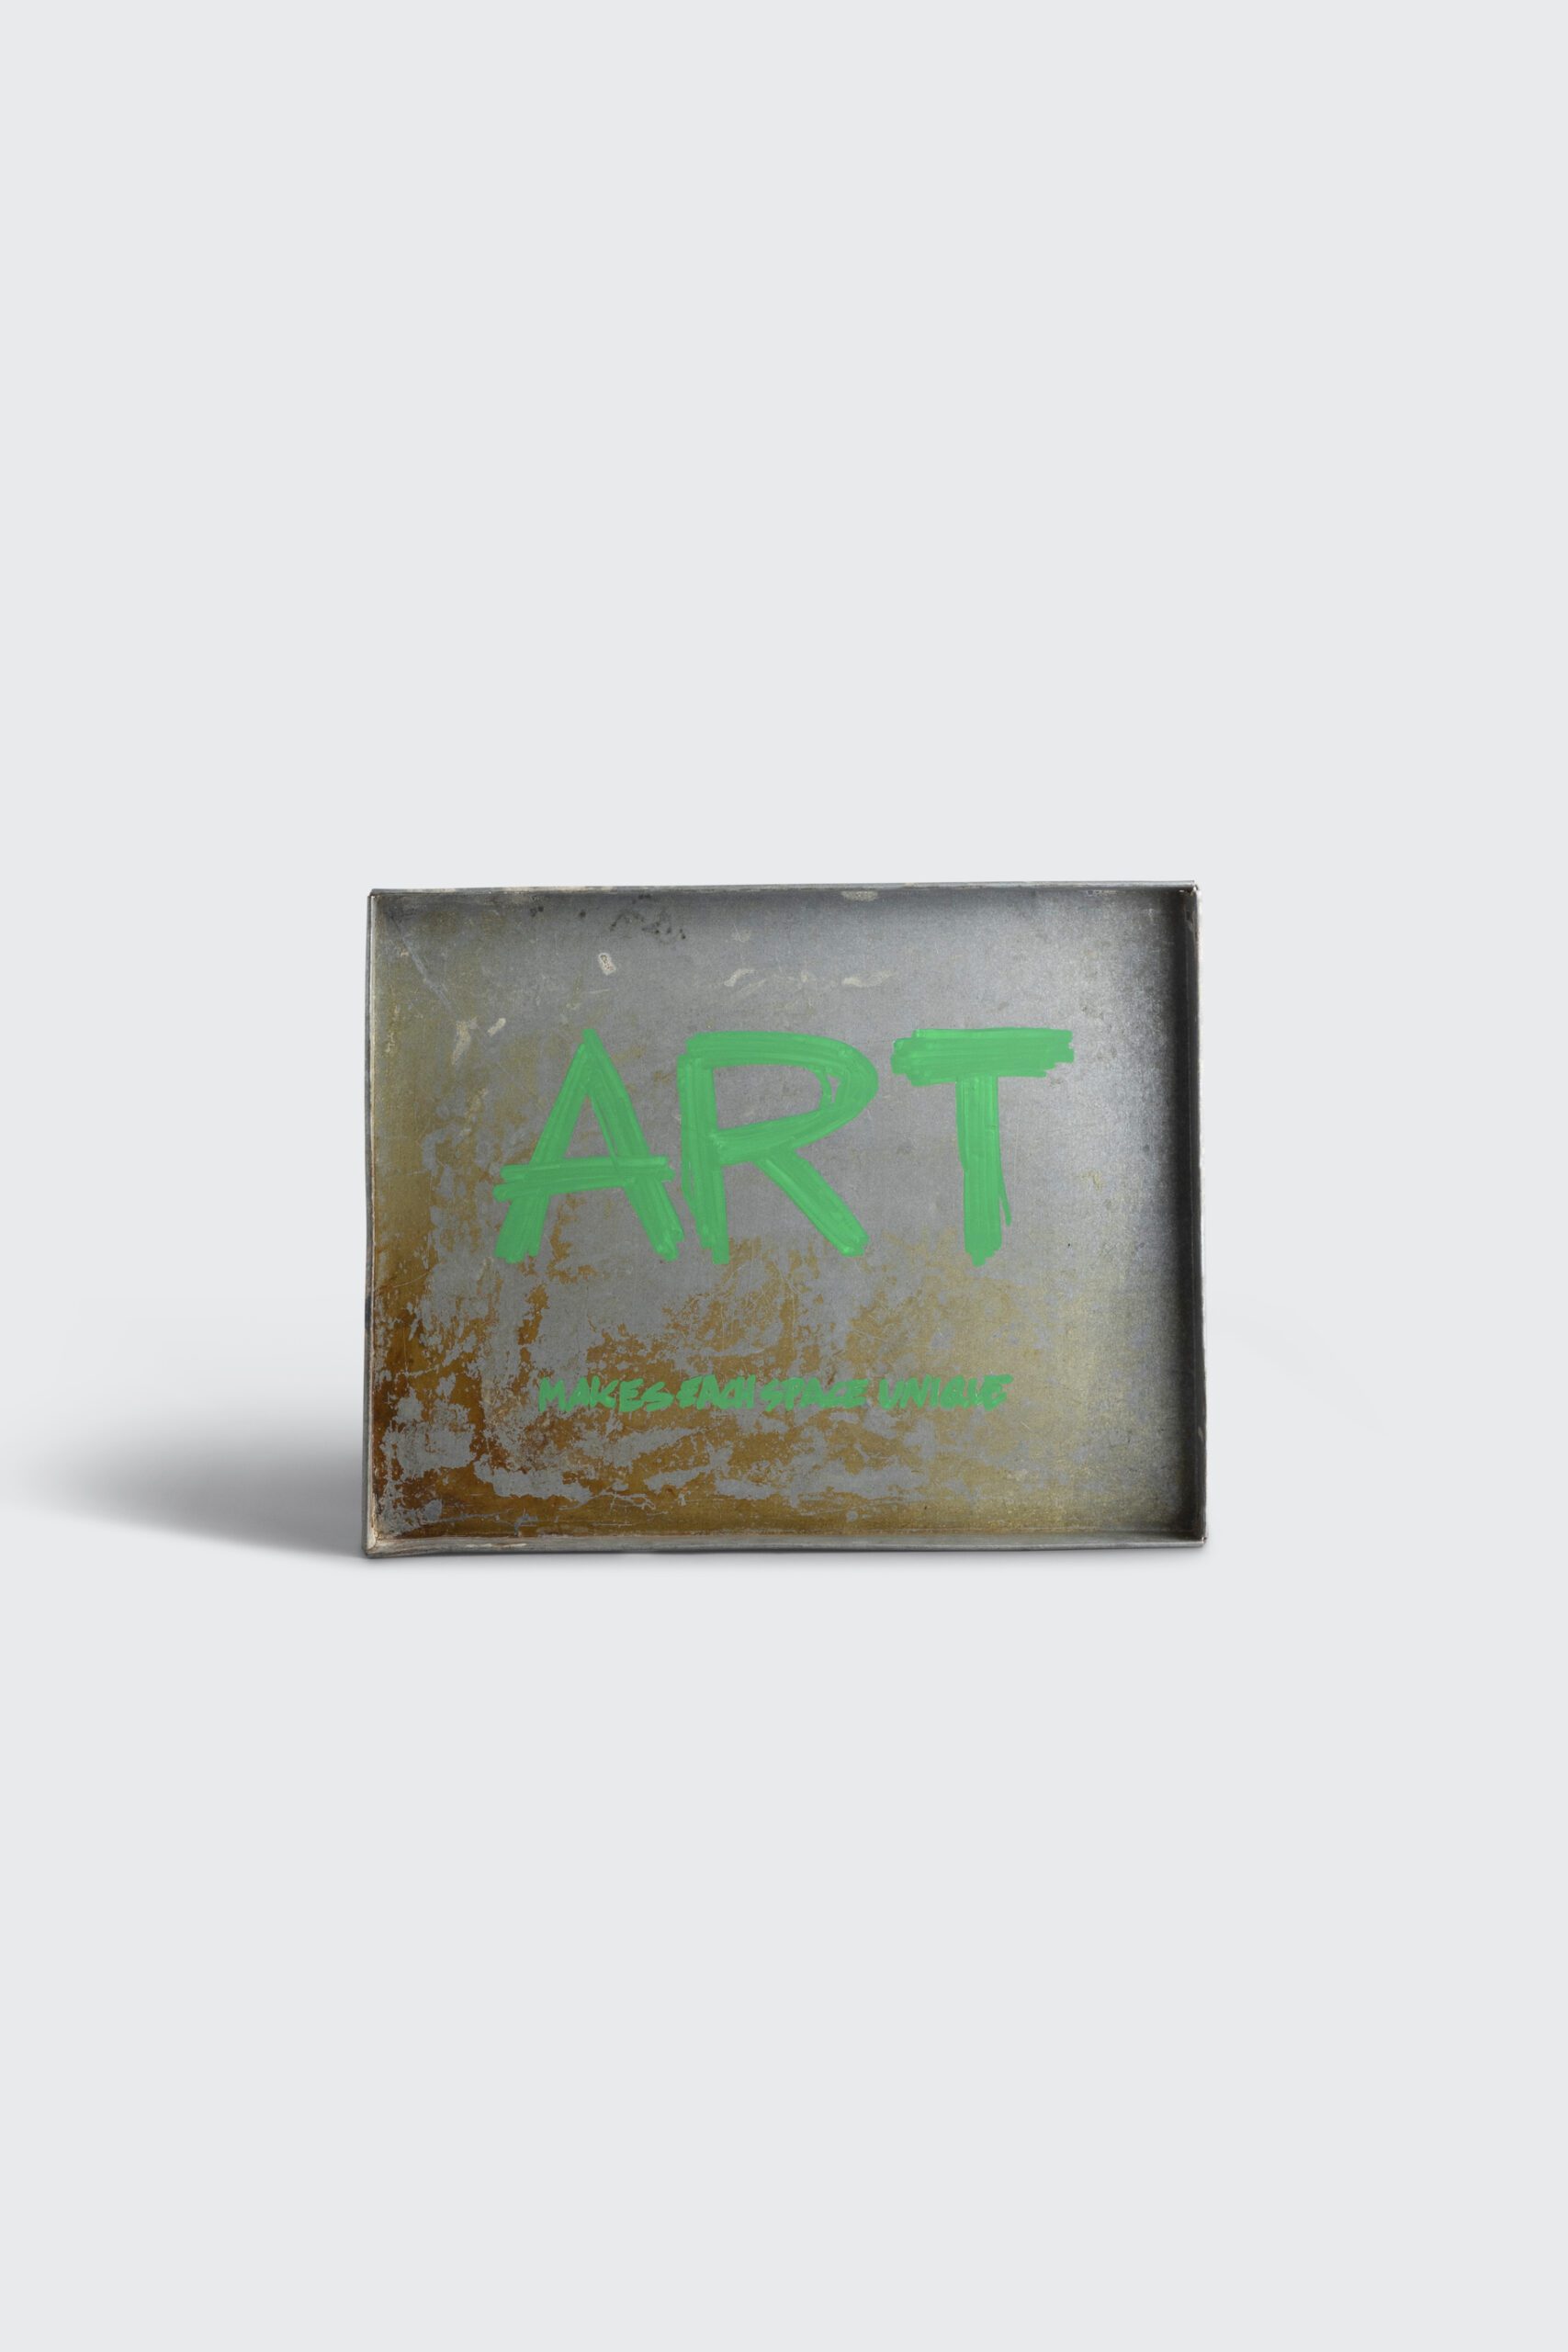 SAV artful tray art green interior design architecture product small objects lifestyle luxury handmade limited edition small expressions commandments yellow blue green pink white black versatile art piece practical perfect combination collection